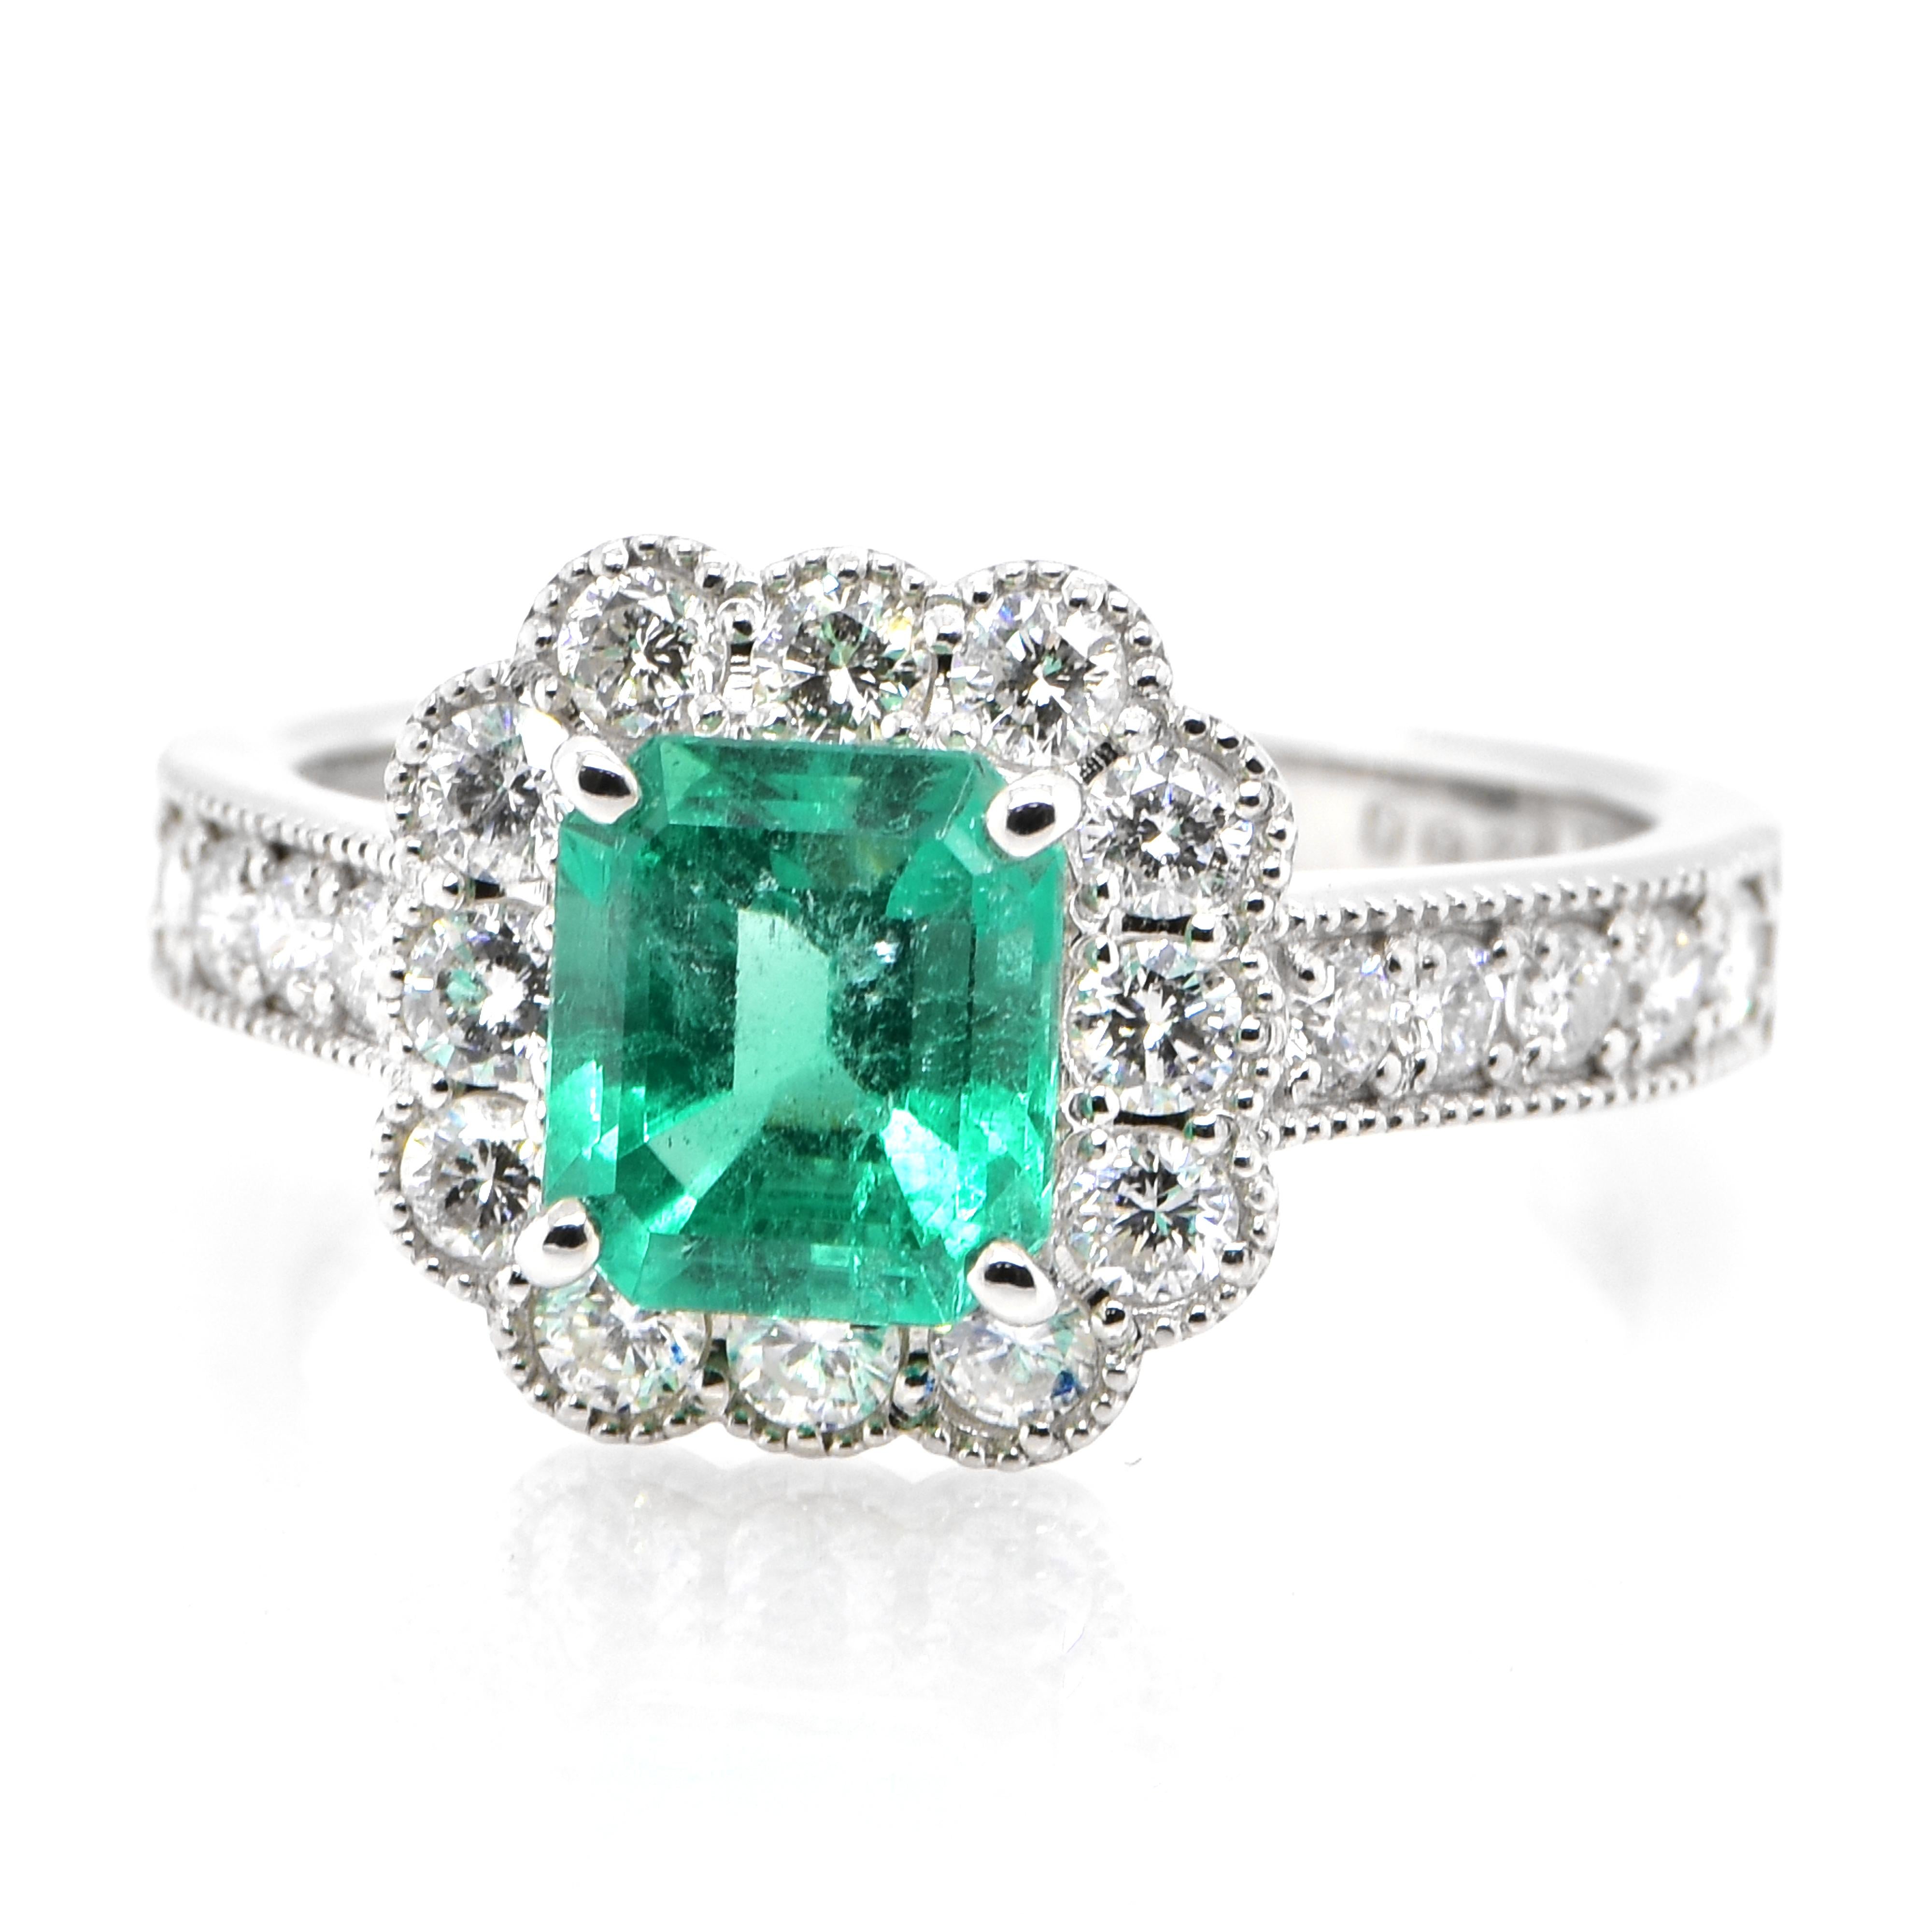 A stunning ring featuring a 1.36 Carat Natural Emerald and 0.81 Carats of Diamond Accents set in Platinum. People have admired emerald’s green for thousands of years. Emeralds have always been associated with the lushest landscapes and the richest